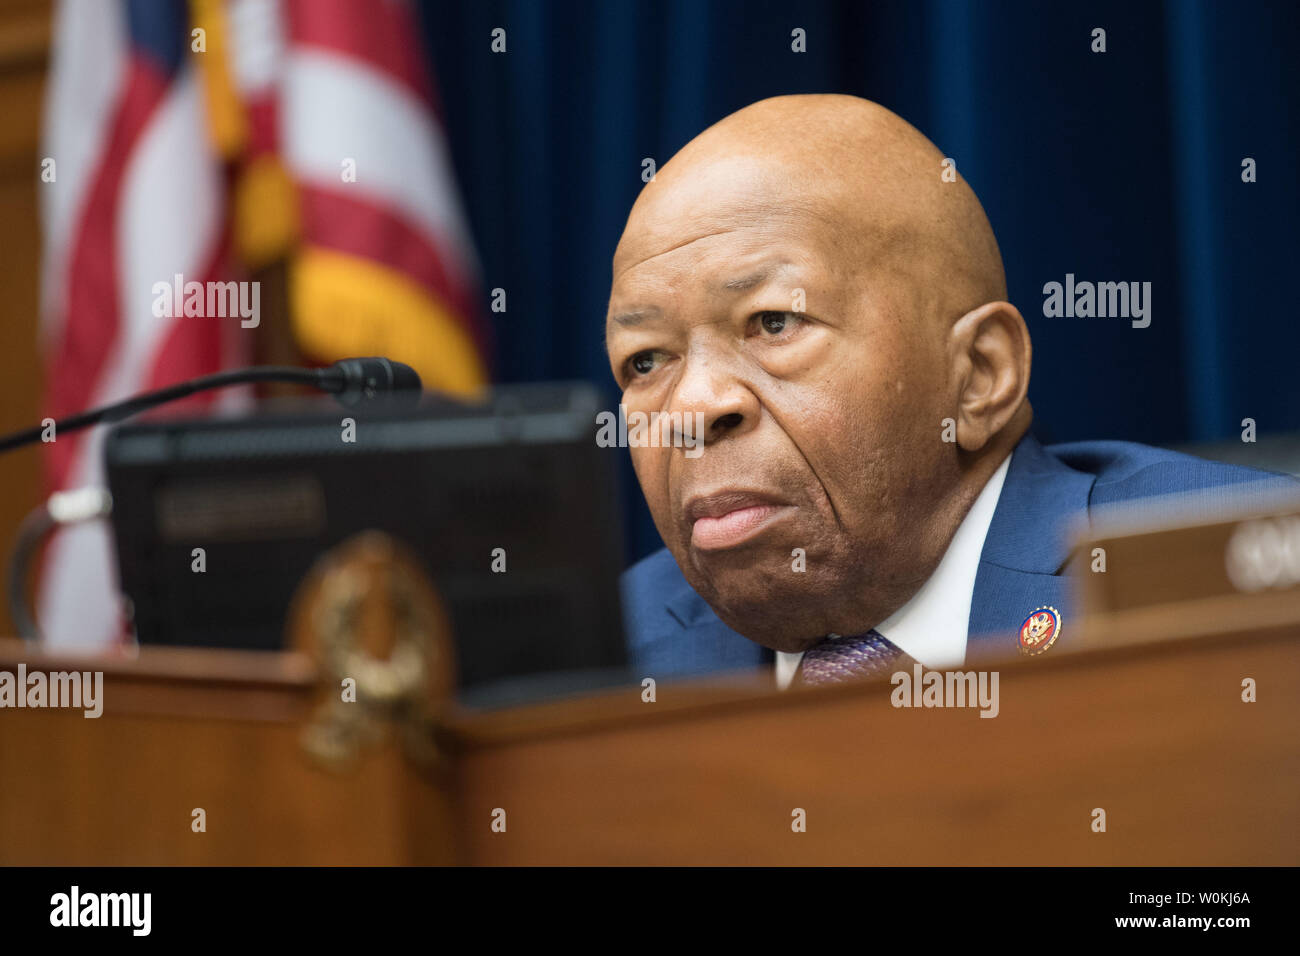 House Oversight and Government Reform Committee Chairman Elijah Cummings, D-MD, presides over a Committee hearing on facial recognition technology, on Capitol Hill in Washington, D.C. on June 4, 2019. Photo by Kevin Dietsch/UPI Stock Photo